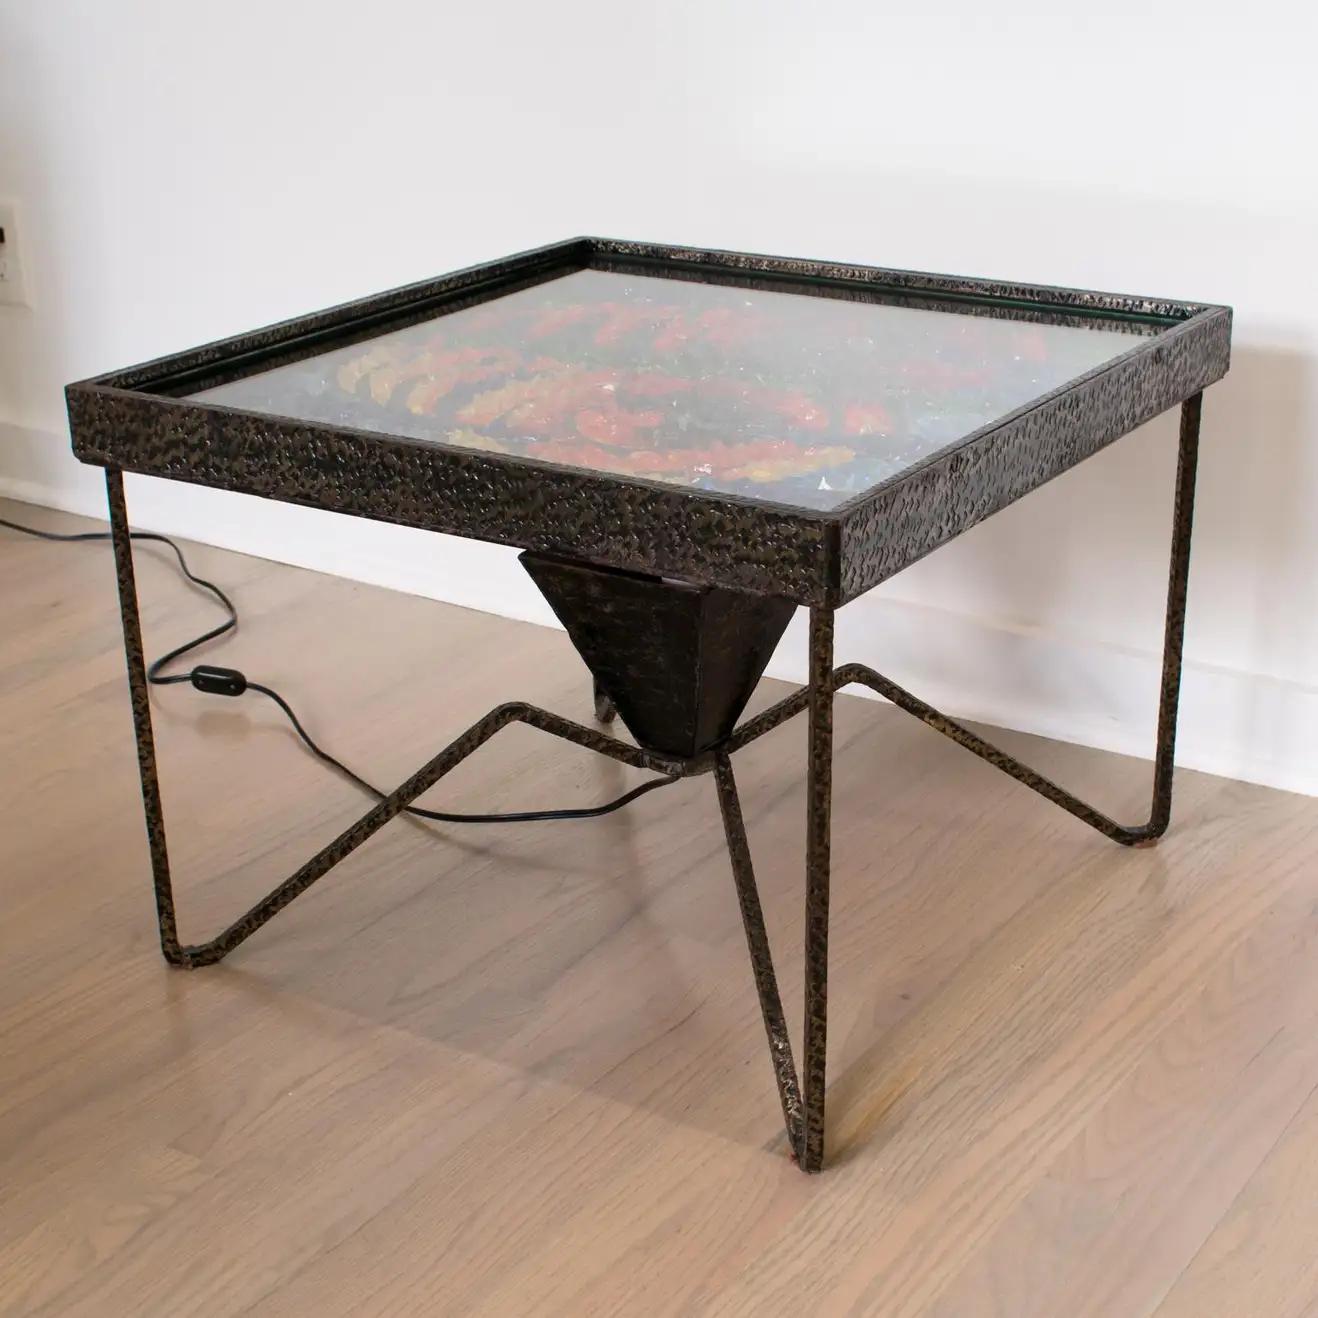 Wrought Iron Side Coffee Table with Glass Mosaic, France 1960s In Good Condition For Sale In Atlanta, GA